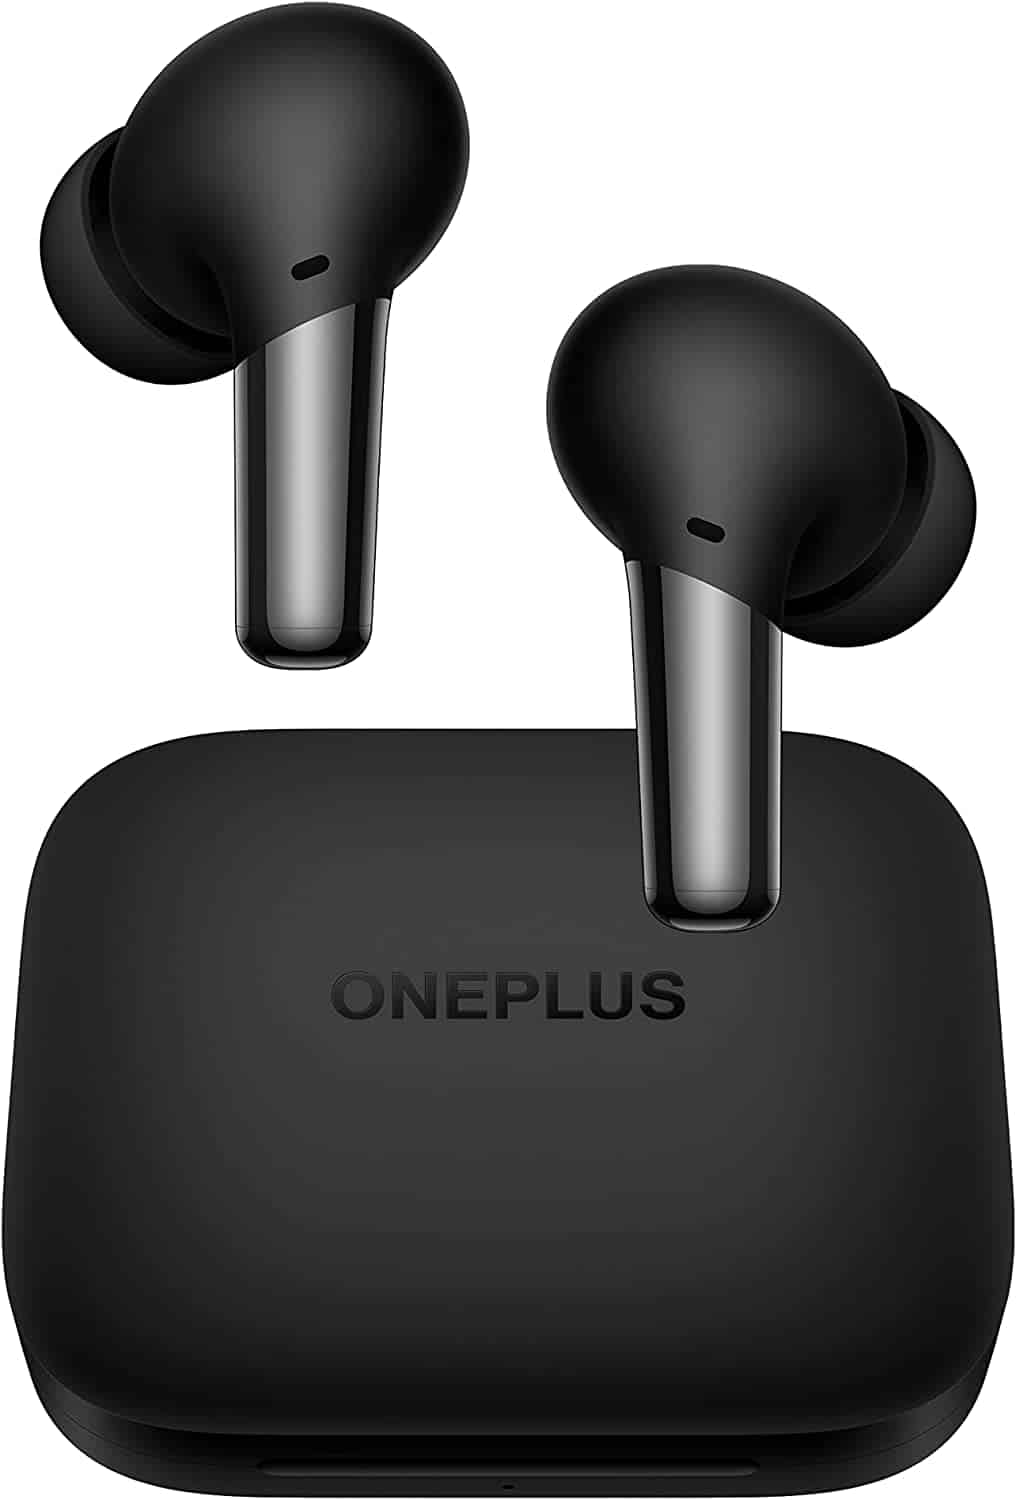 Amazon Prime Day 2022: OnePlus Buds Pro wireless earbuds 40% off